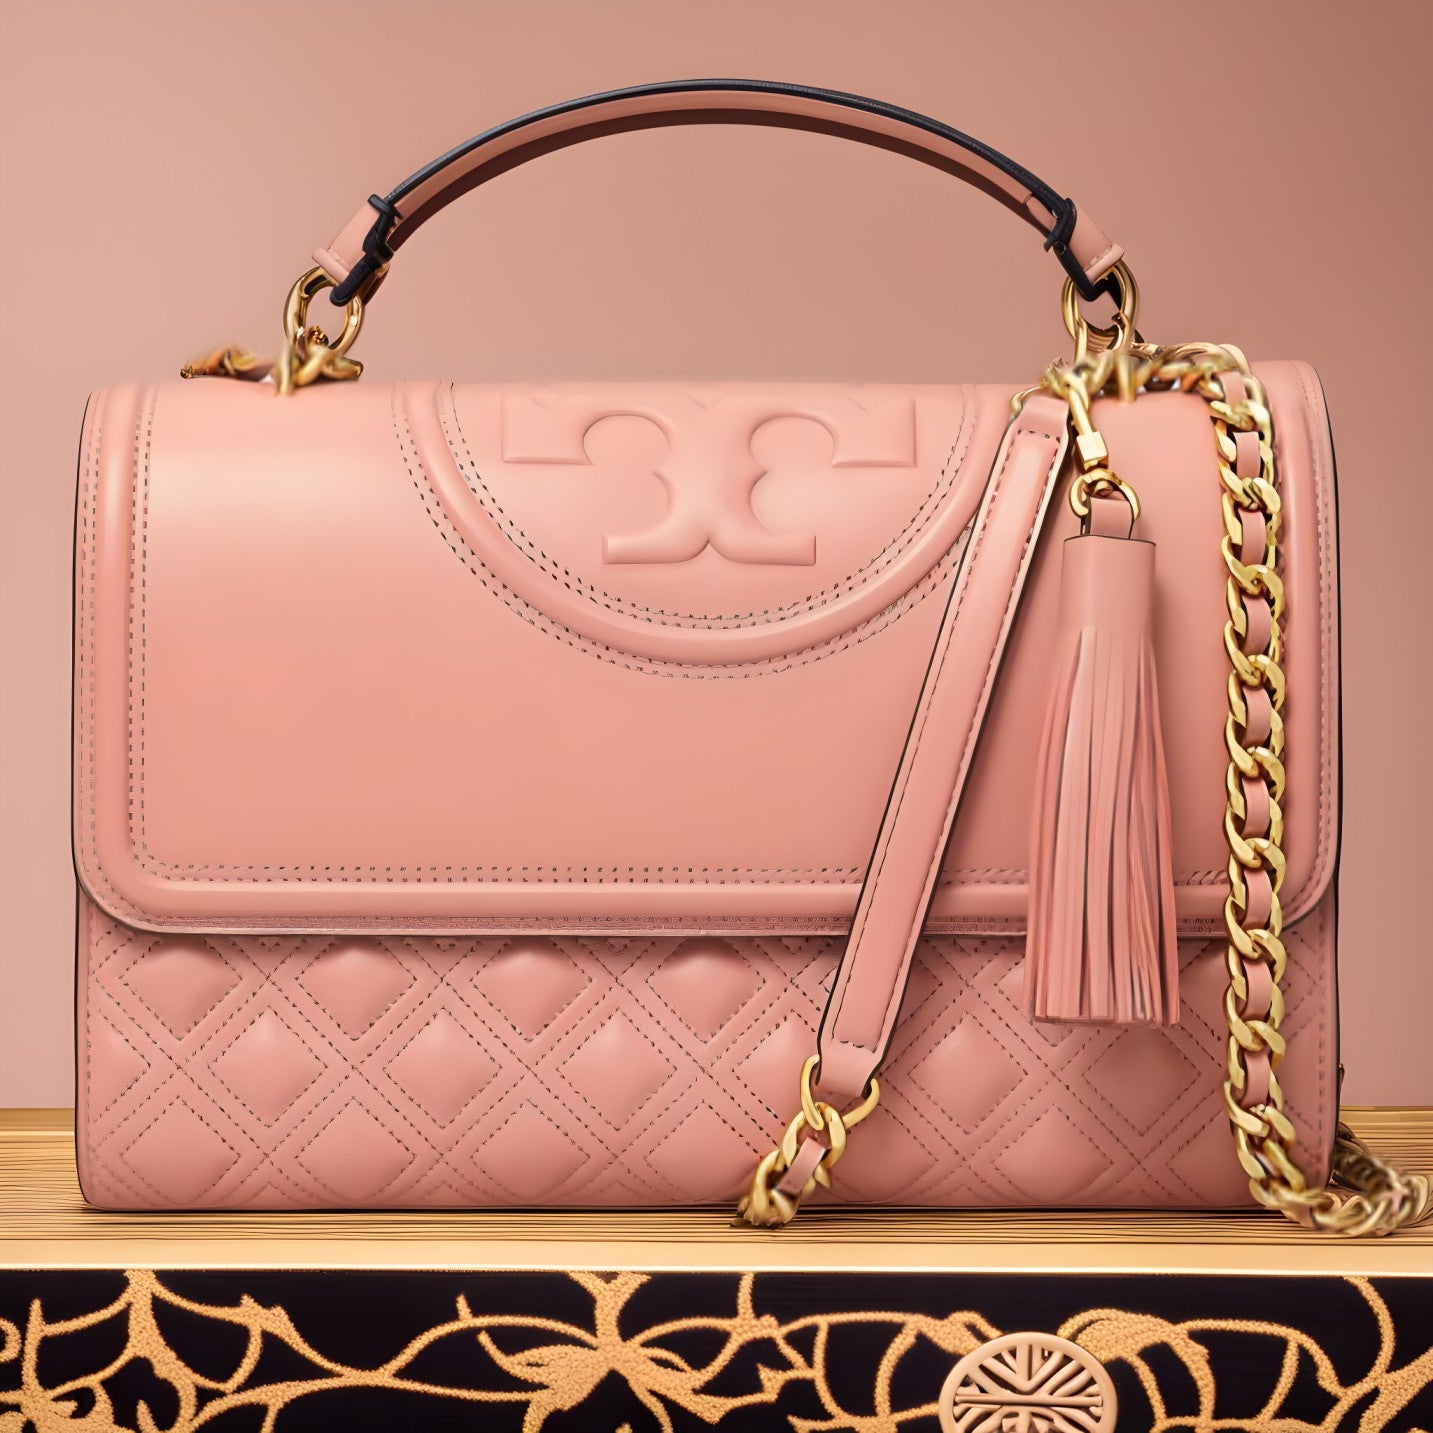 15 Tory Burch Bags That'll Last You a Lifetime - PureWow